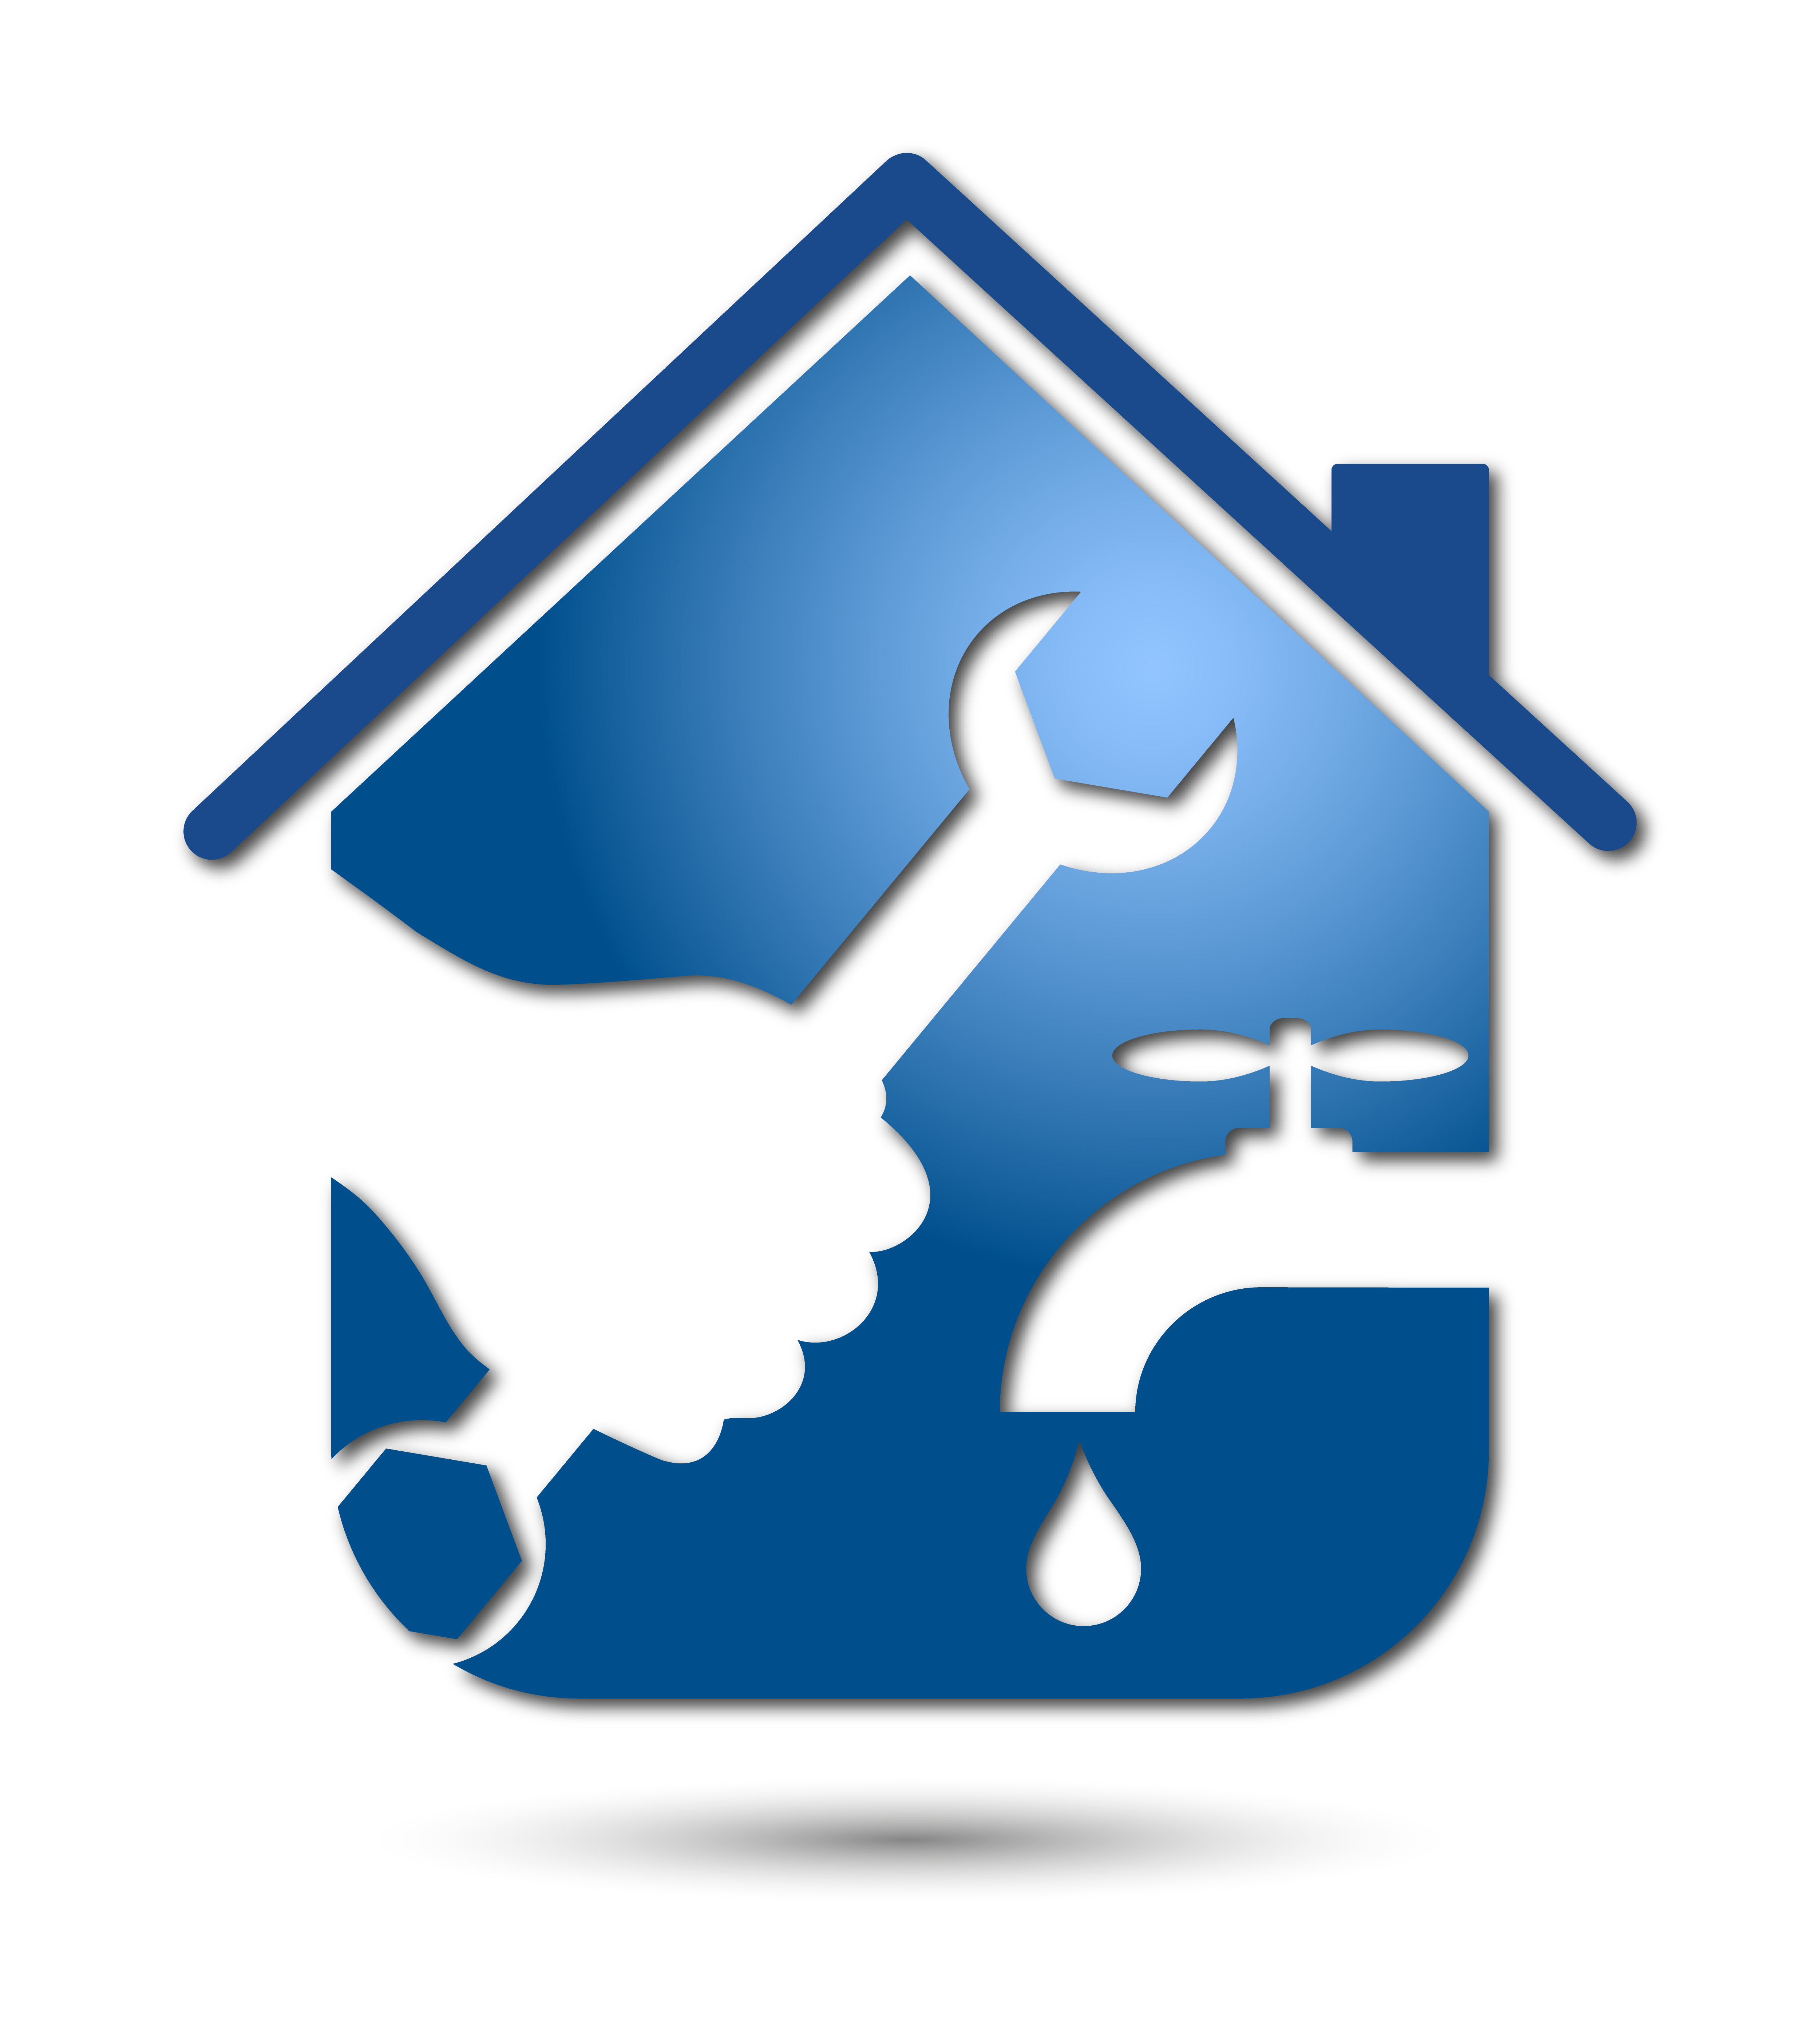 Plumbing And Heating Clipart   Free Clip Art Images